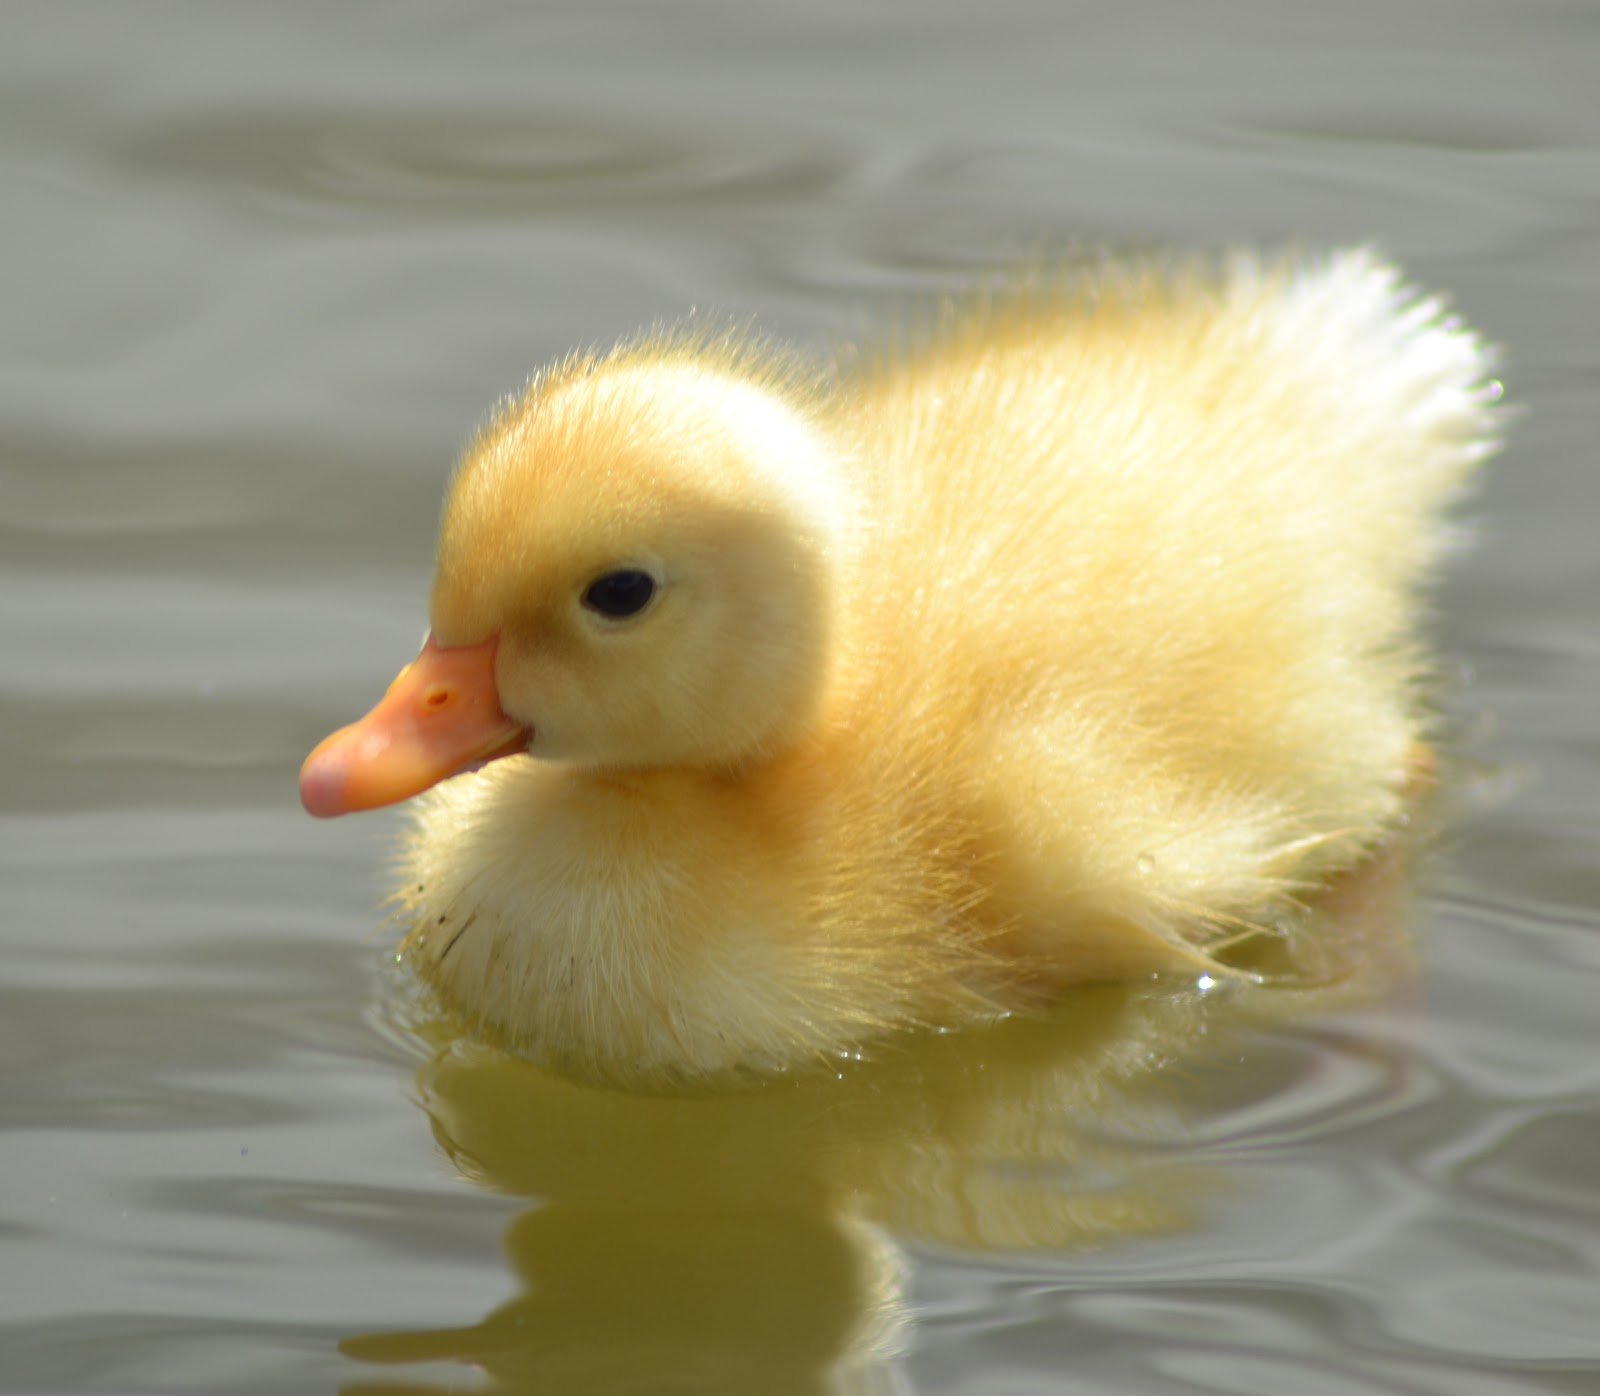 TheA+ Photography: Fluffy Duck